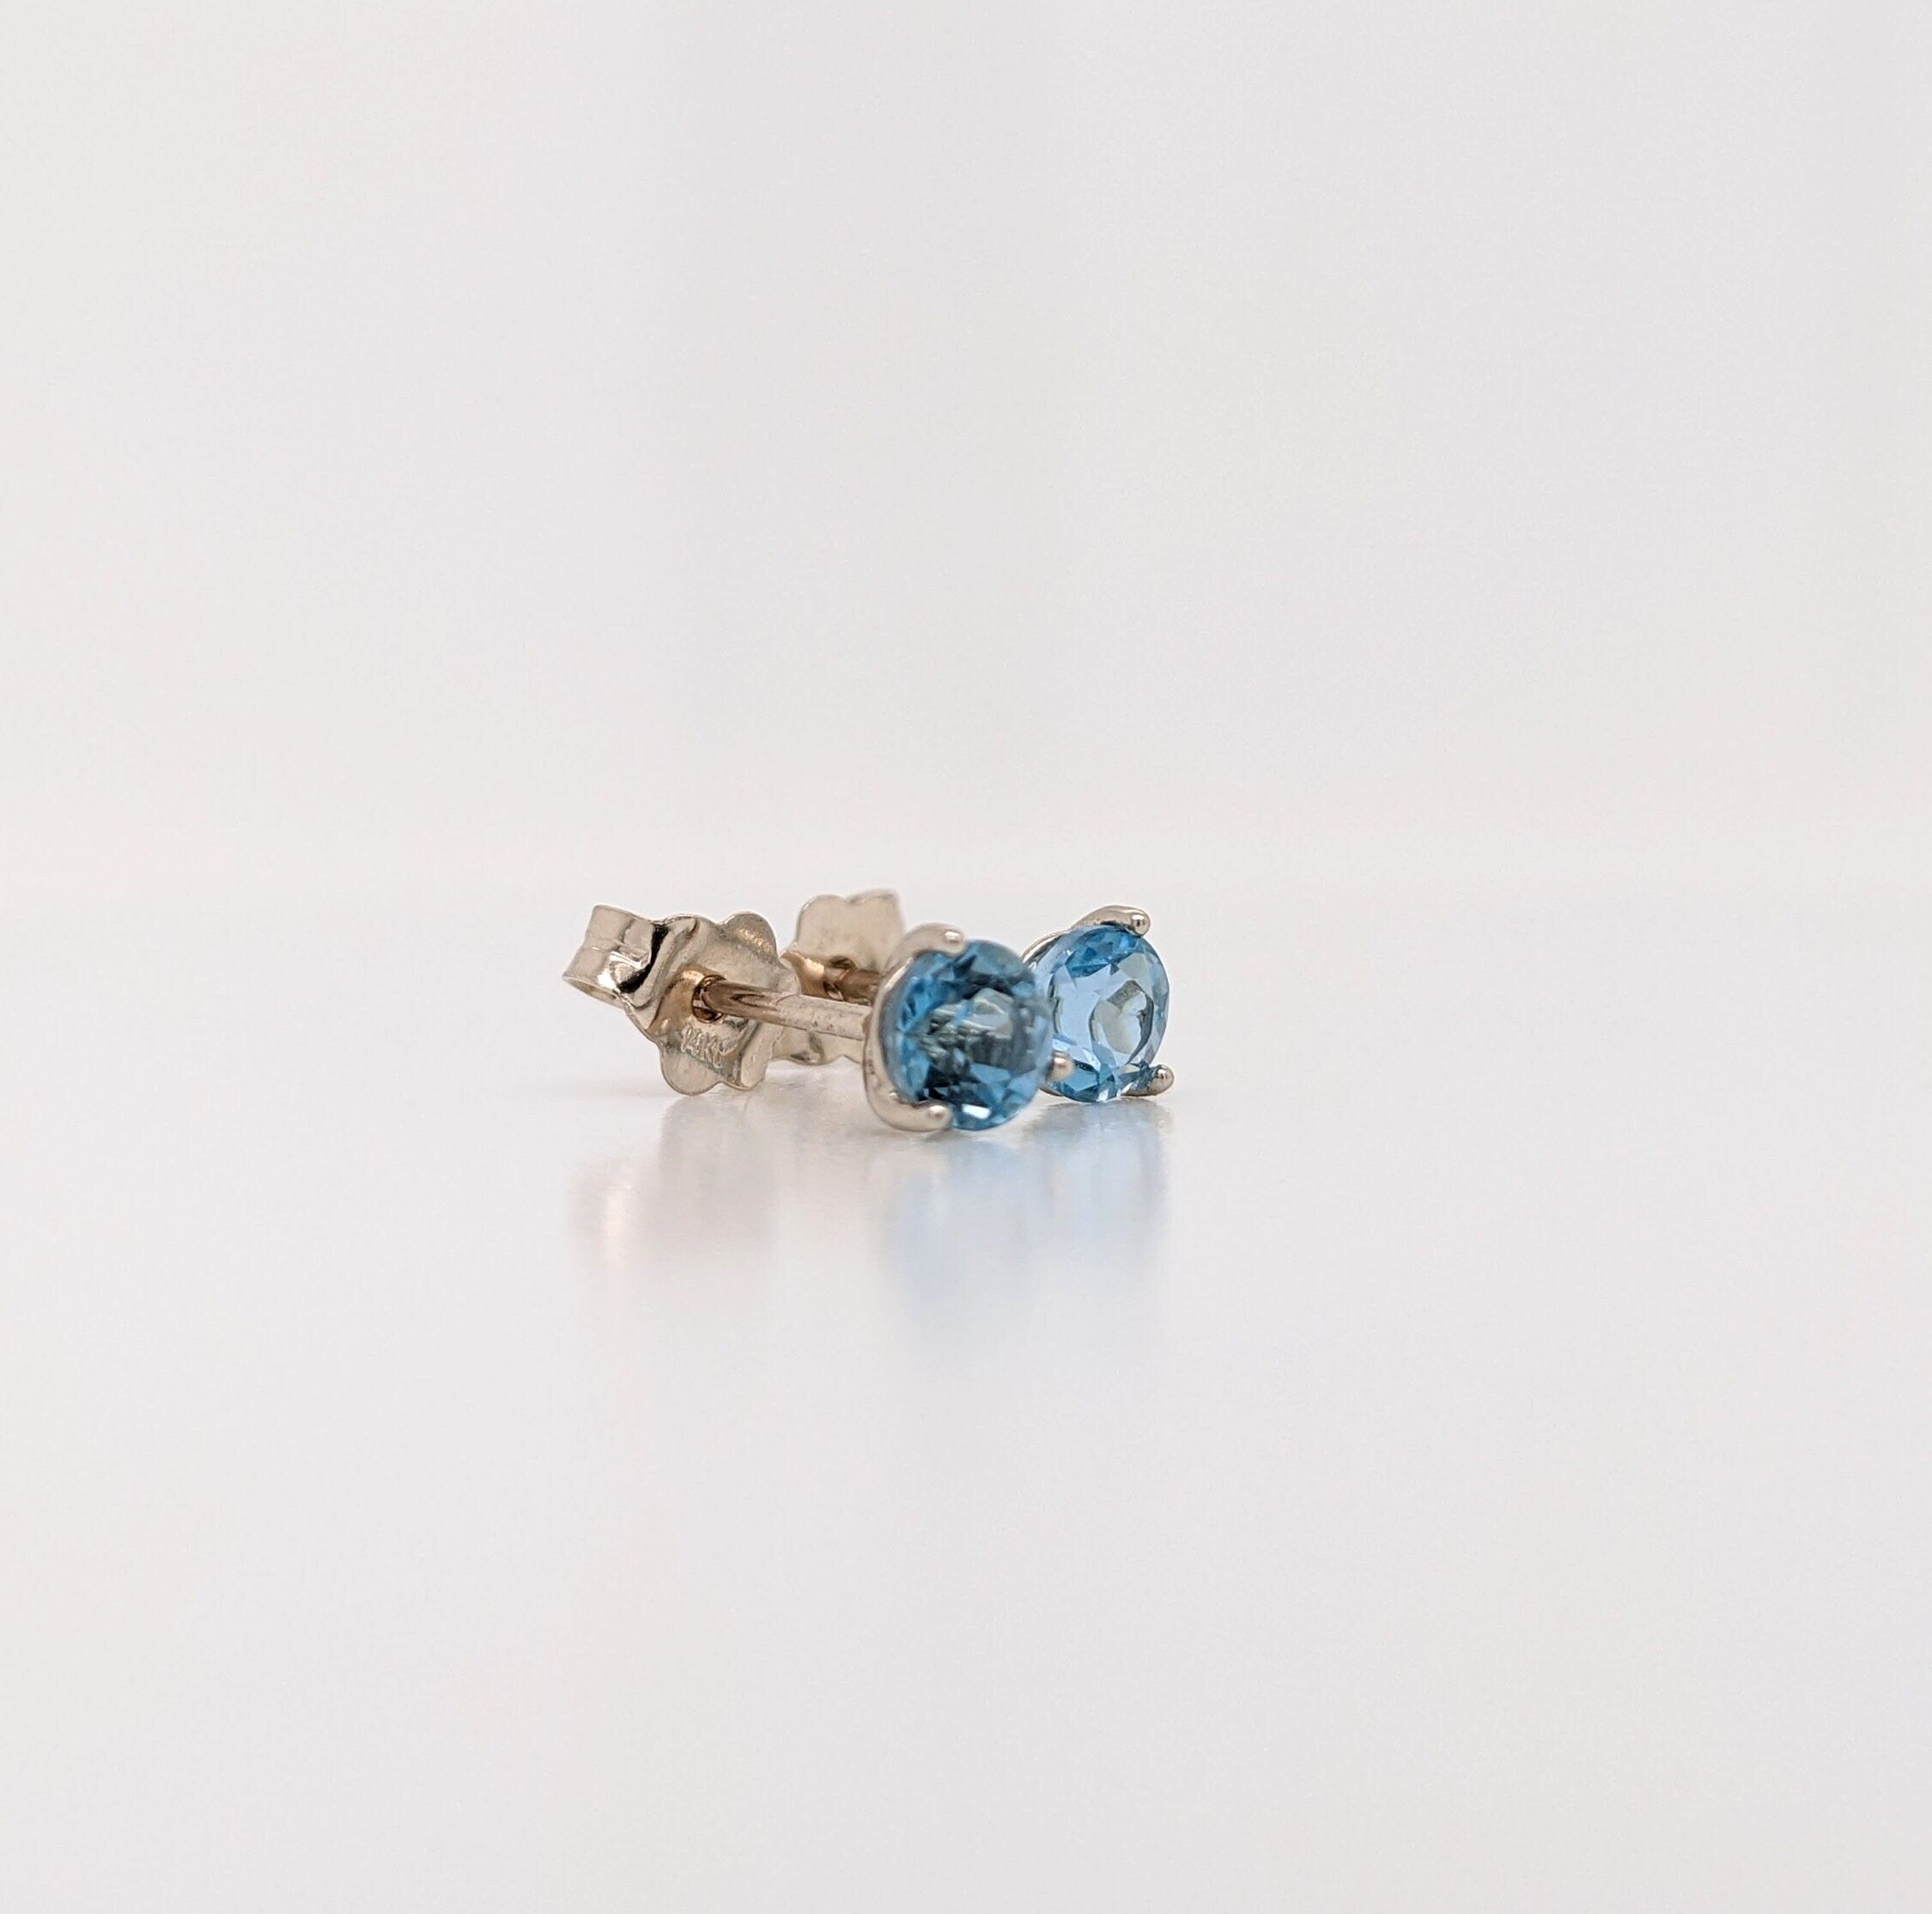 Stunning Aquamarine Studs in 14k Solid Gold w Martini Setting | Round 4mm 5mm 6mm | Solitaire Earrings | March Birthstone I Push Backing